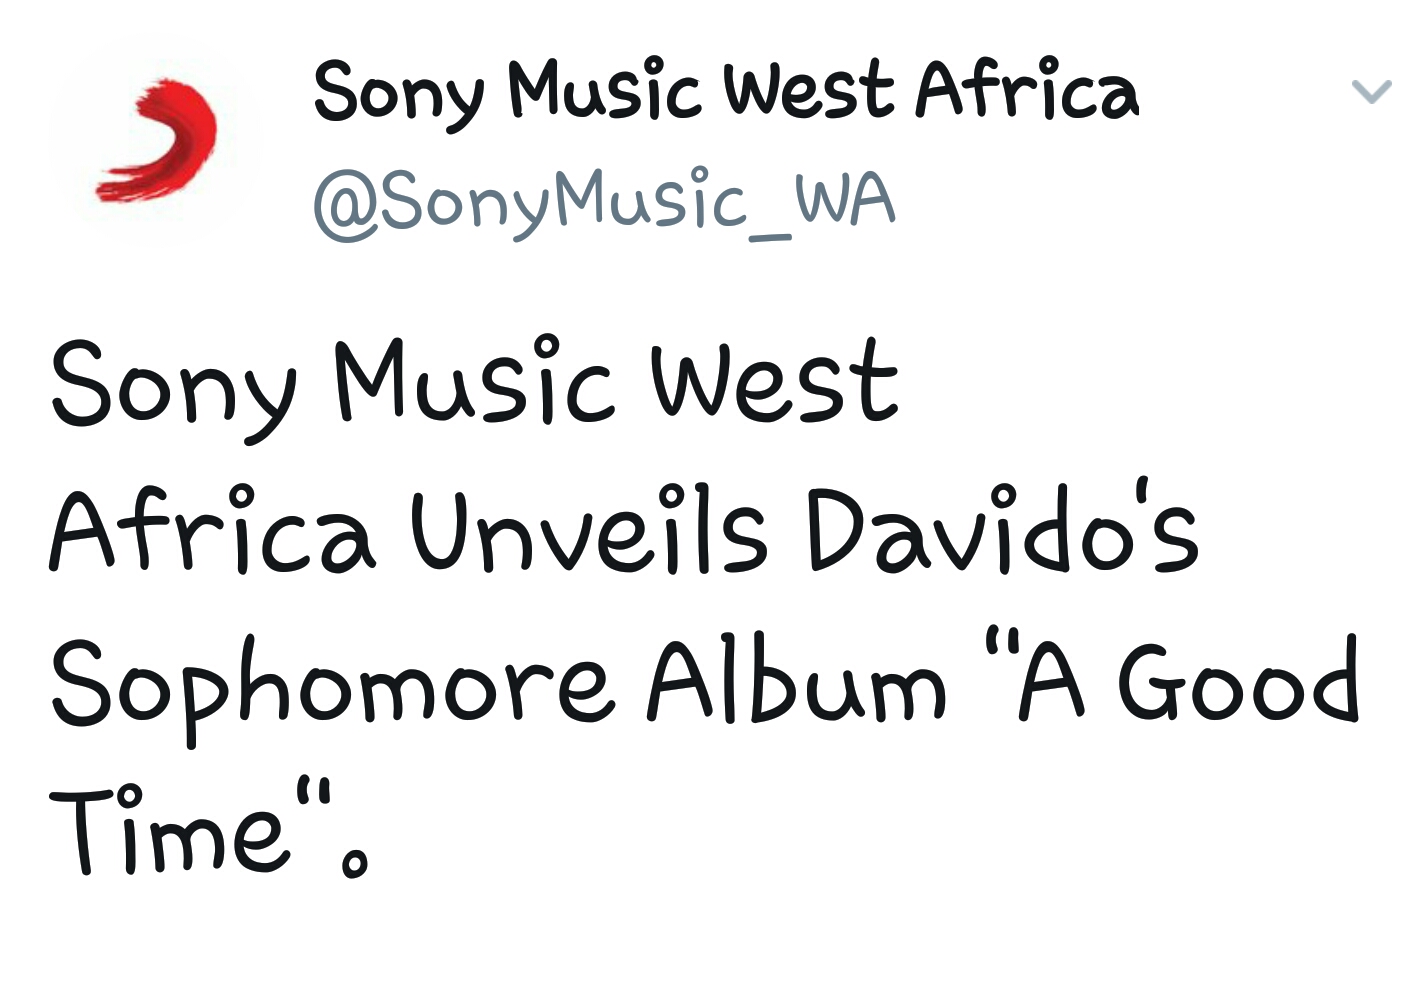 Announcing the title of the album, the singer said all songs on the album could be credited to Nigerian producers except one international producer.